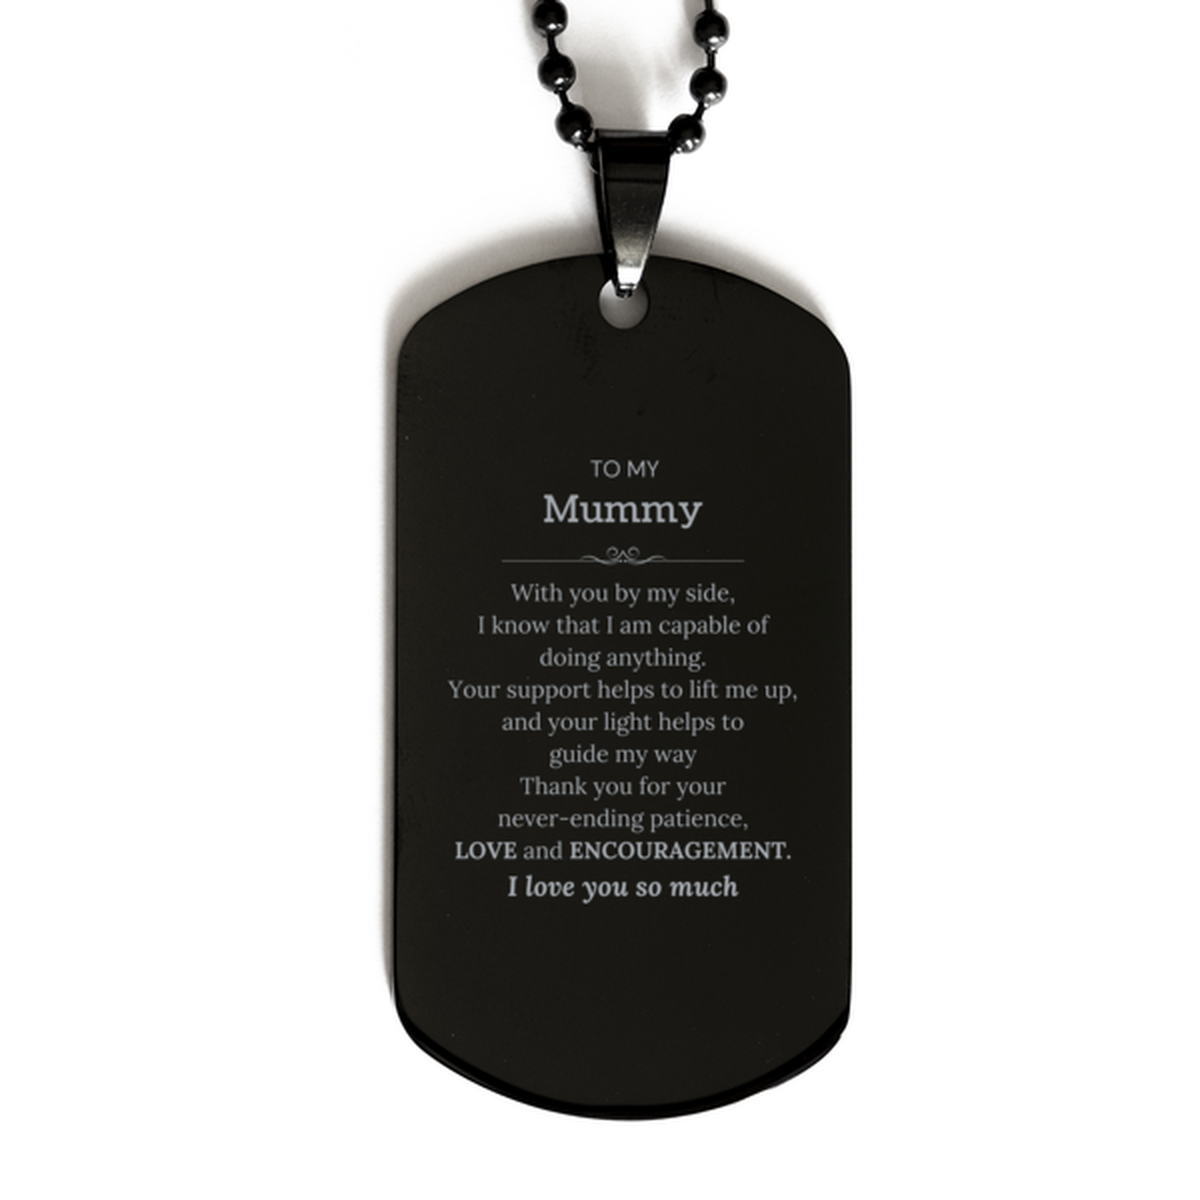 Appreciation Mummy Black Dog Tag Gifts, To My Mummy Birthday Christmas Wedding Keepsake Gifts for Mummy With you by my side, I know that I am capable of doing anything. I love you so much